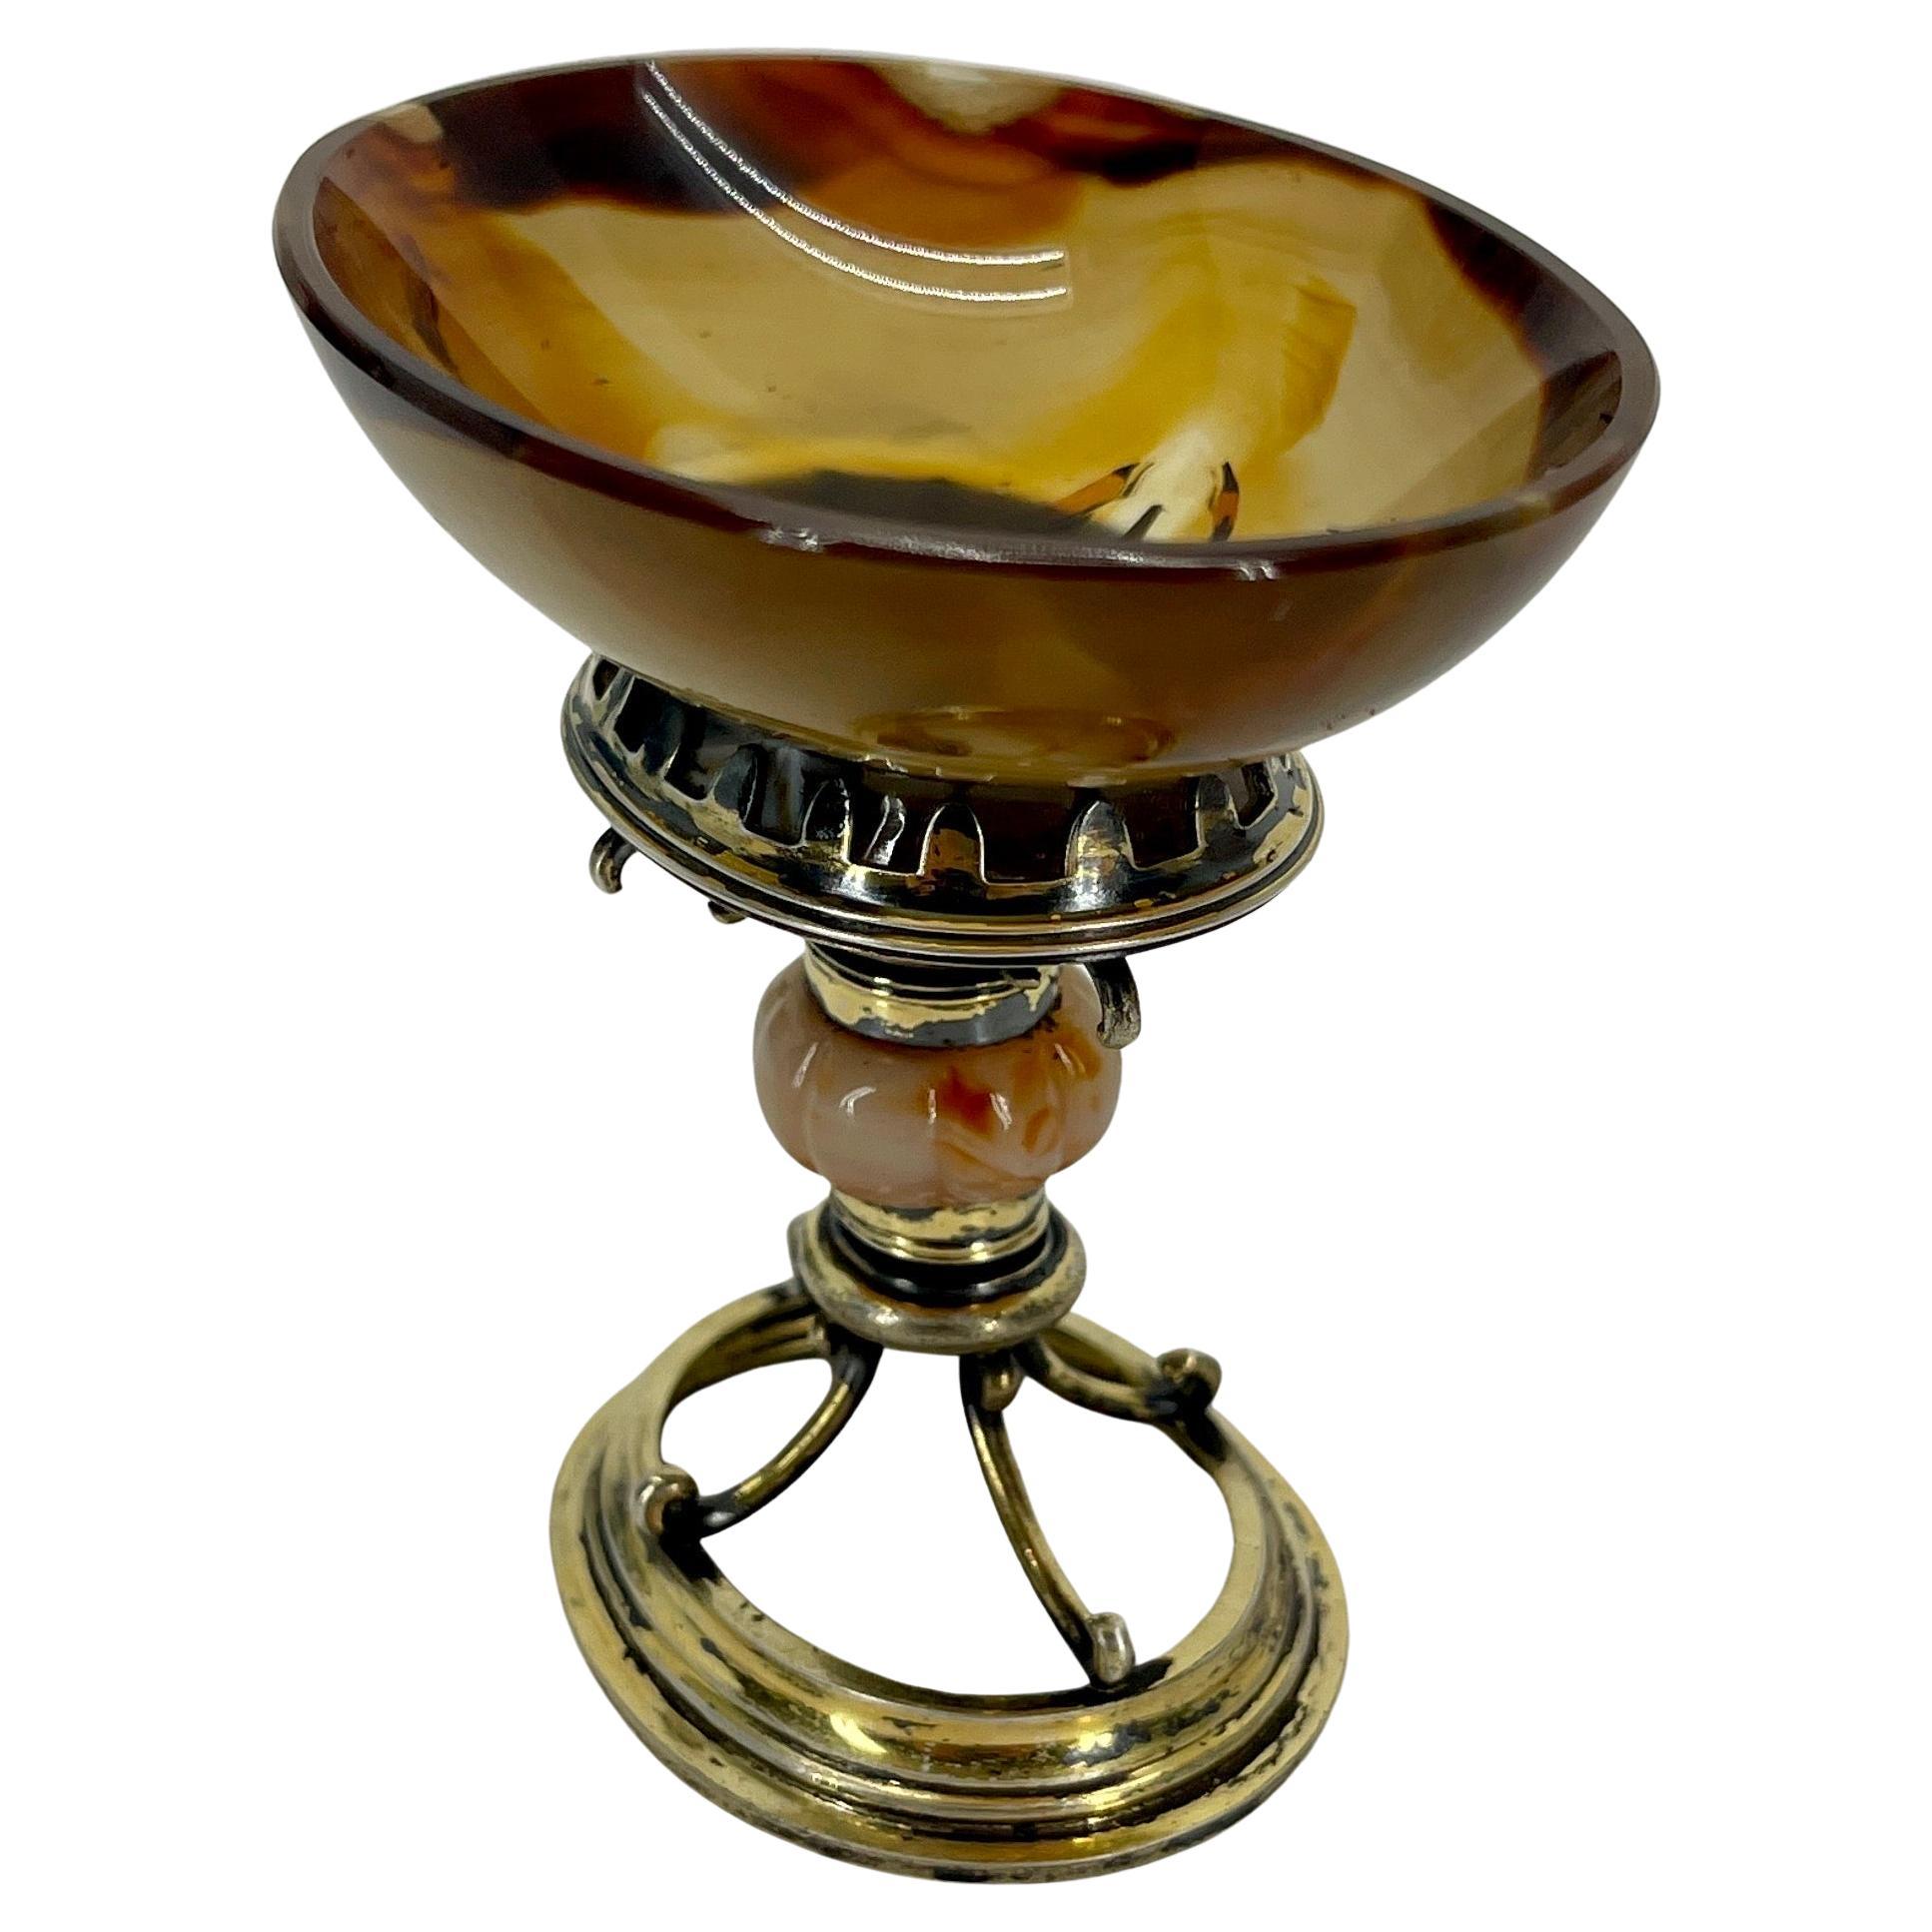 19th Century Early English Agate and Gilt Sterling Silver Jar Bowl or Salt Cellar For Sale